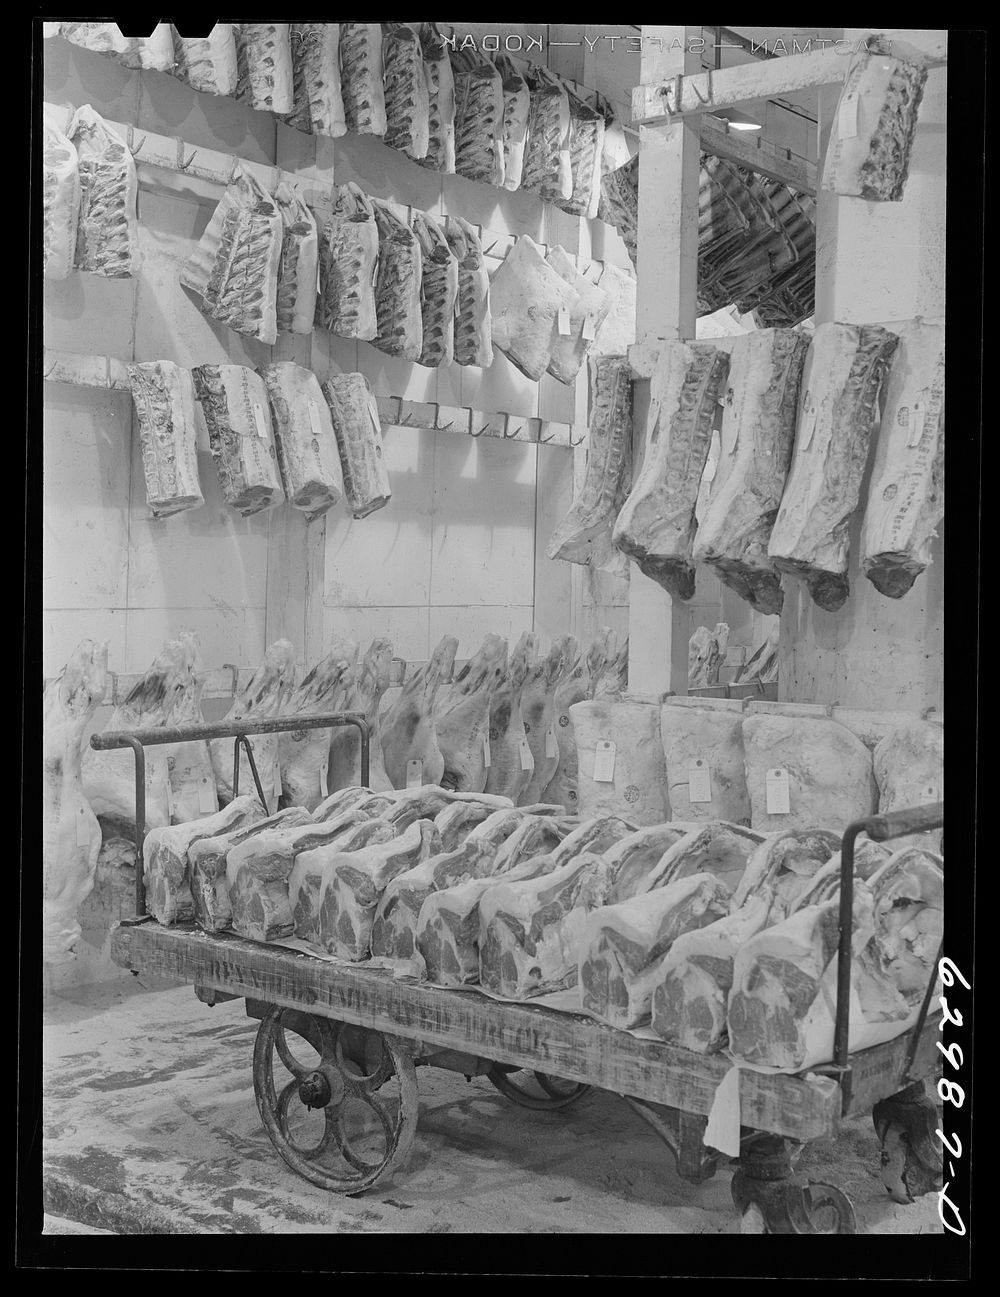 Meat in cold storage at Davidson Meat Company, suppliers of hotels, restaurants, etc. Chicago, Illinois. Sourced from the…